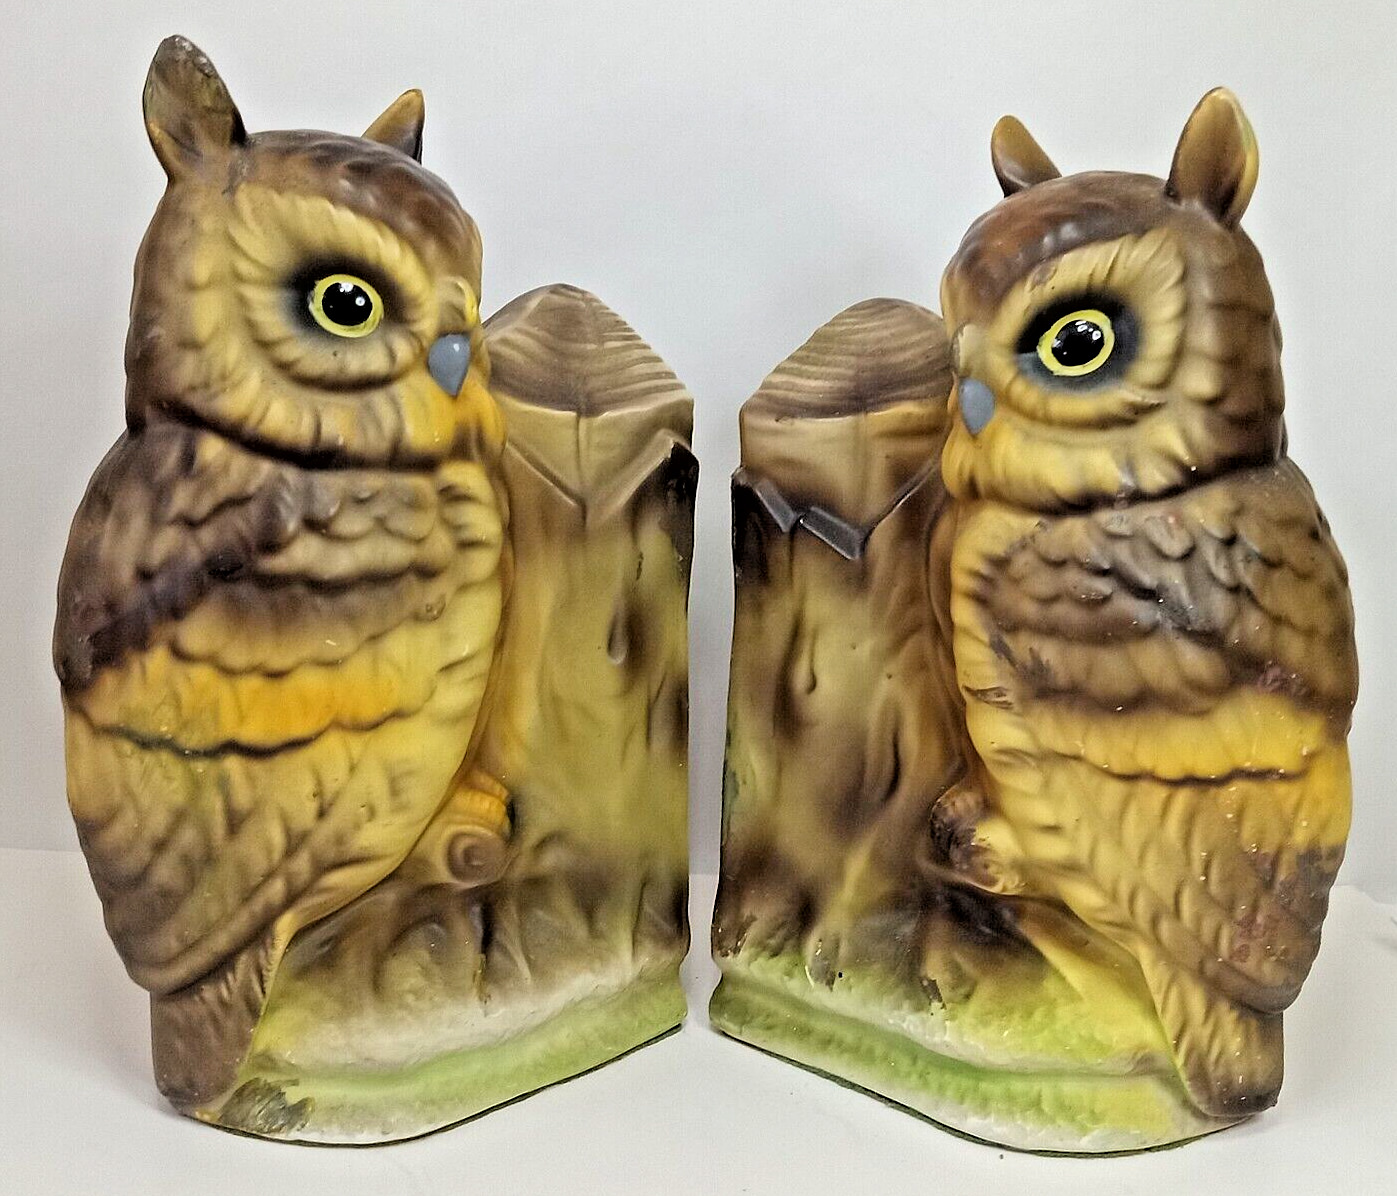 Vintage Pair Of Ceramic Horned Night Owl Bookends On Tree Stump 1980s 7” tall